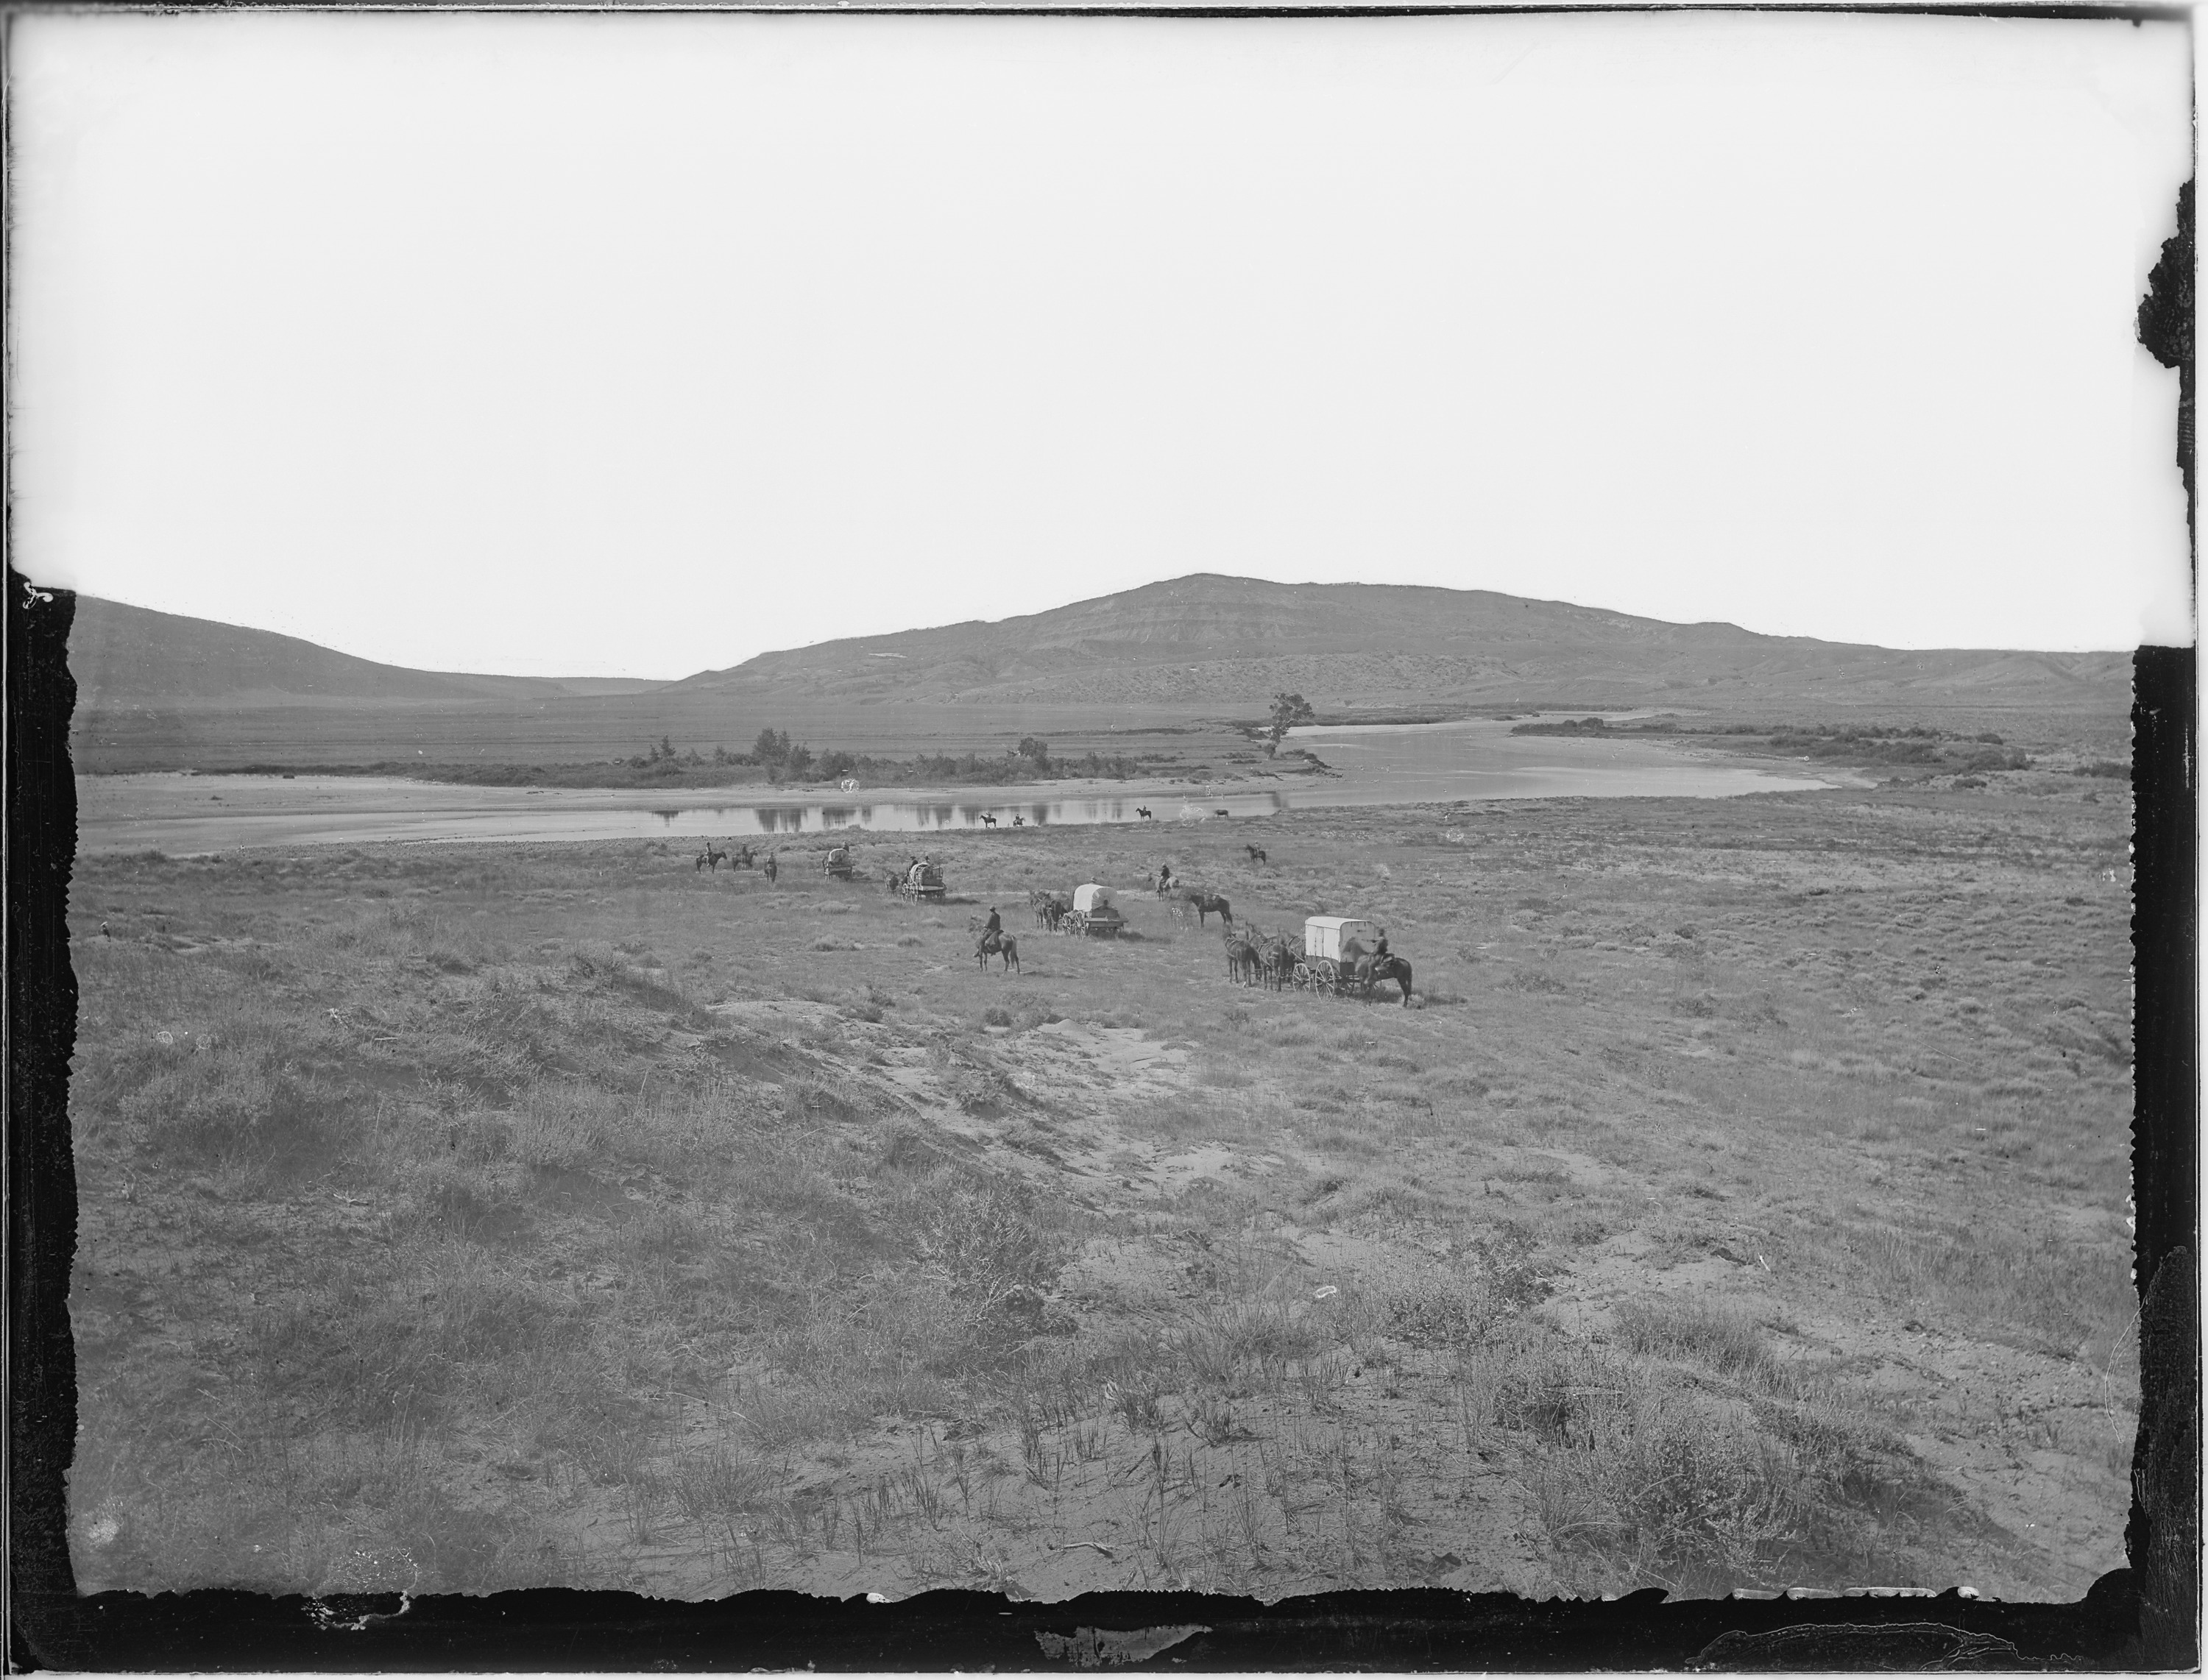 Photograph of the Red Buttes - NARA - 516886